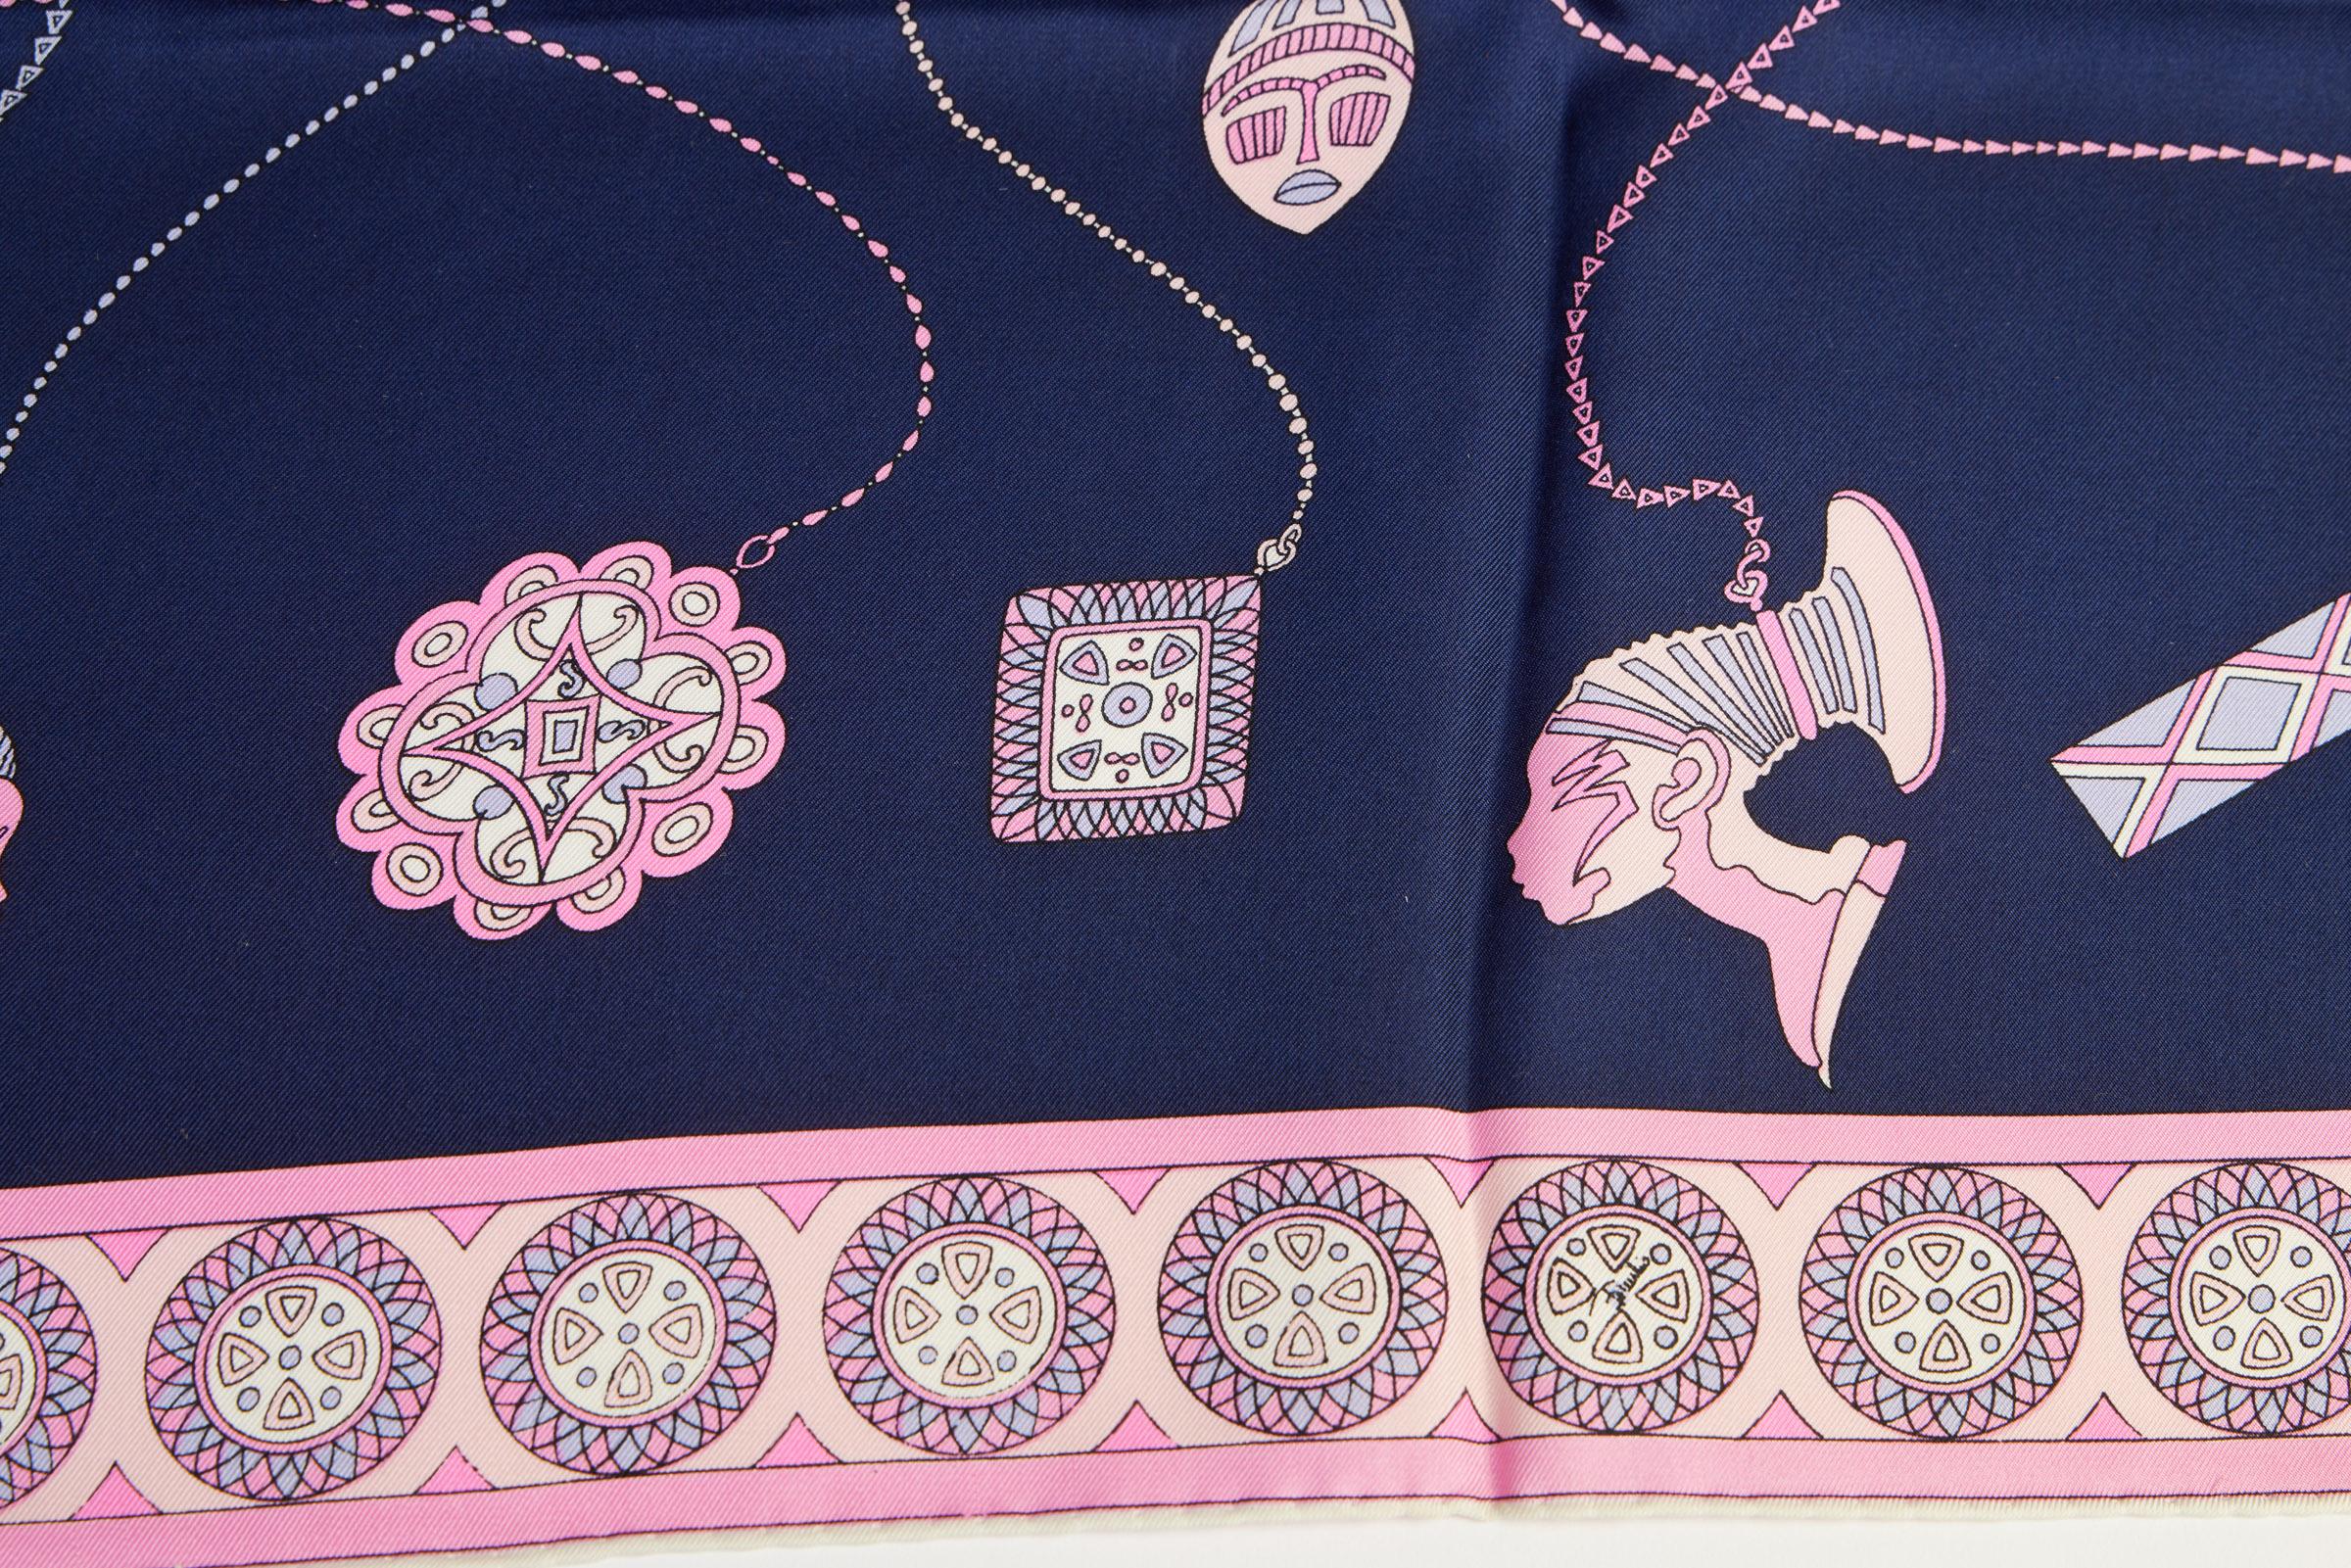 Vintage Emilio Pucci Florence silk scarf in blue and pink. Hand-rolled edges.